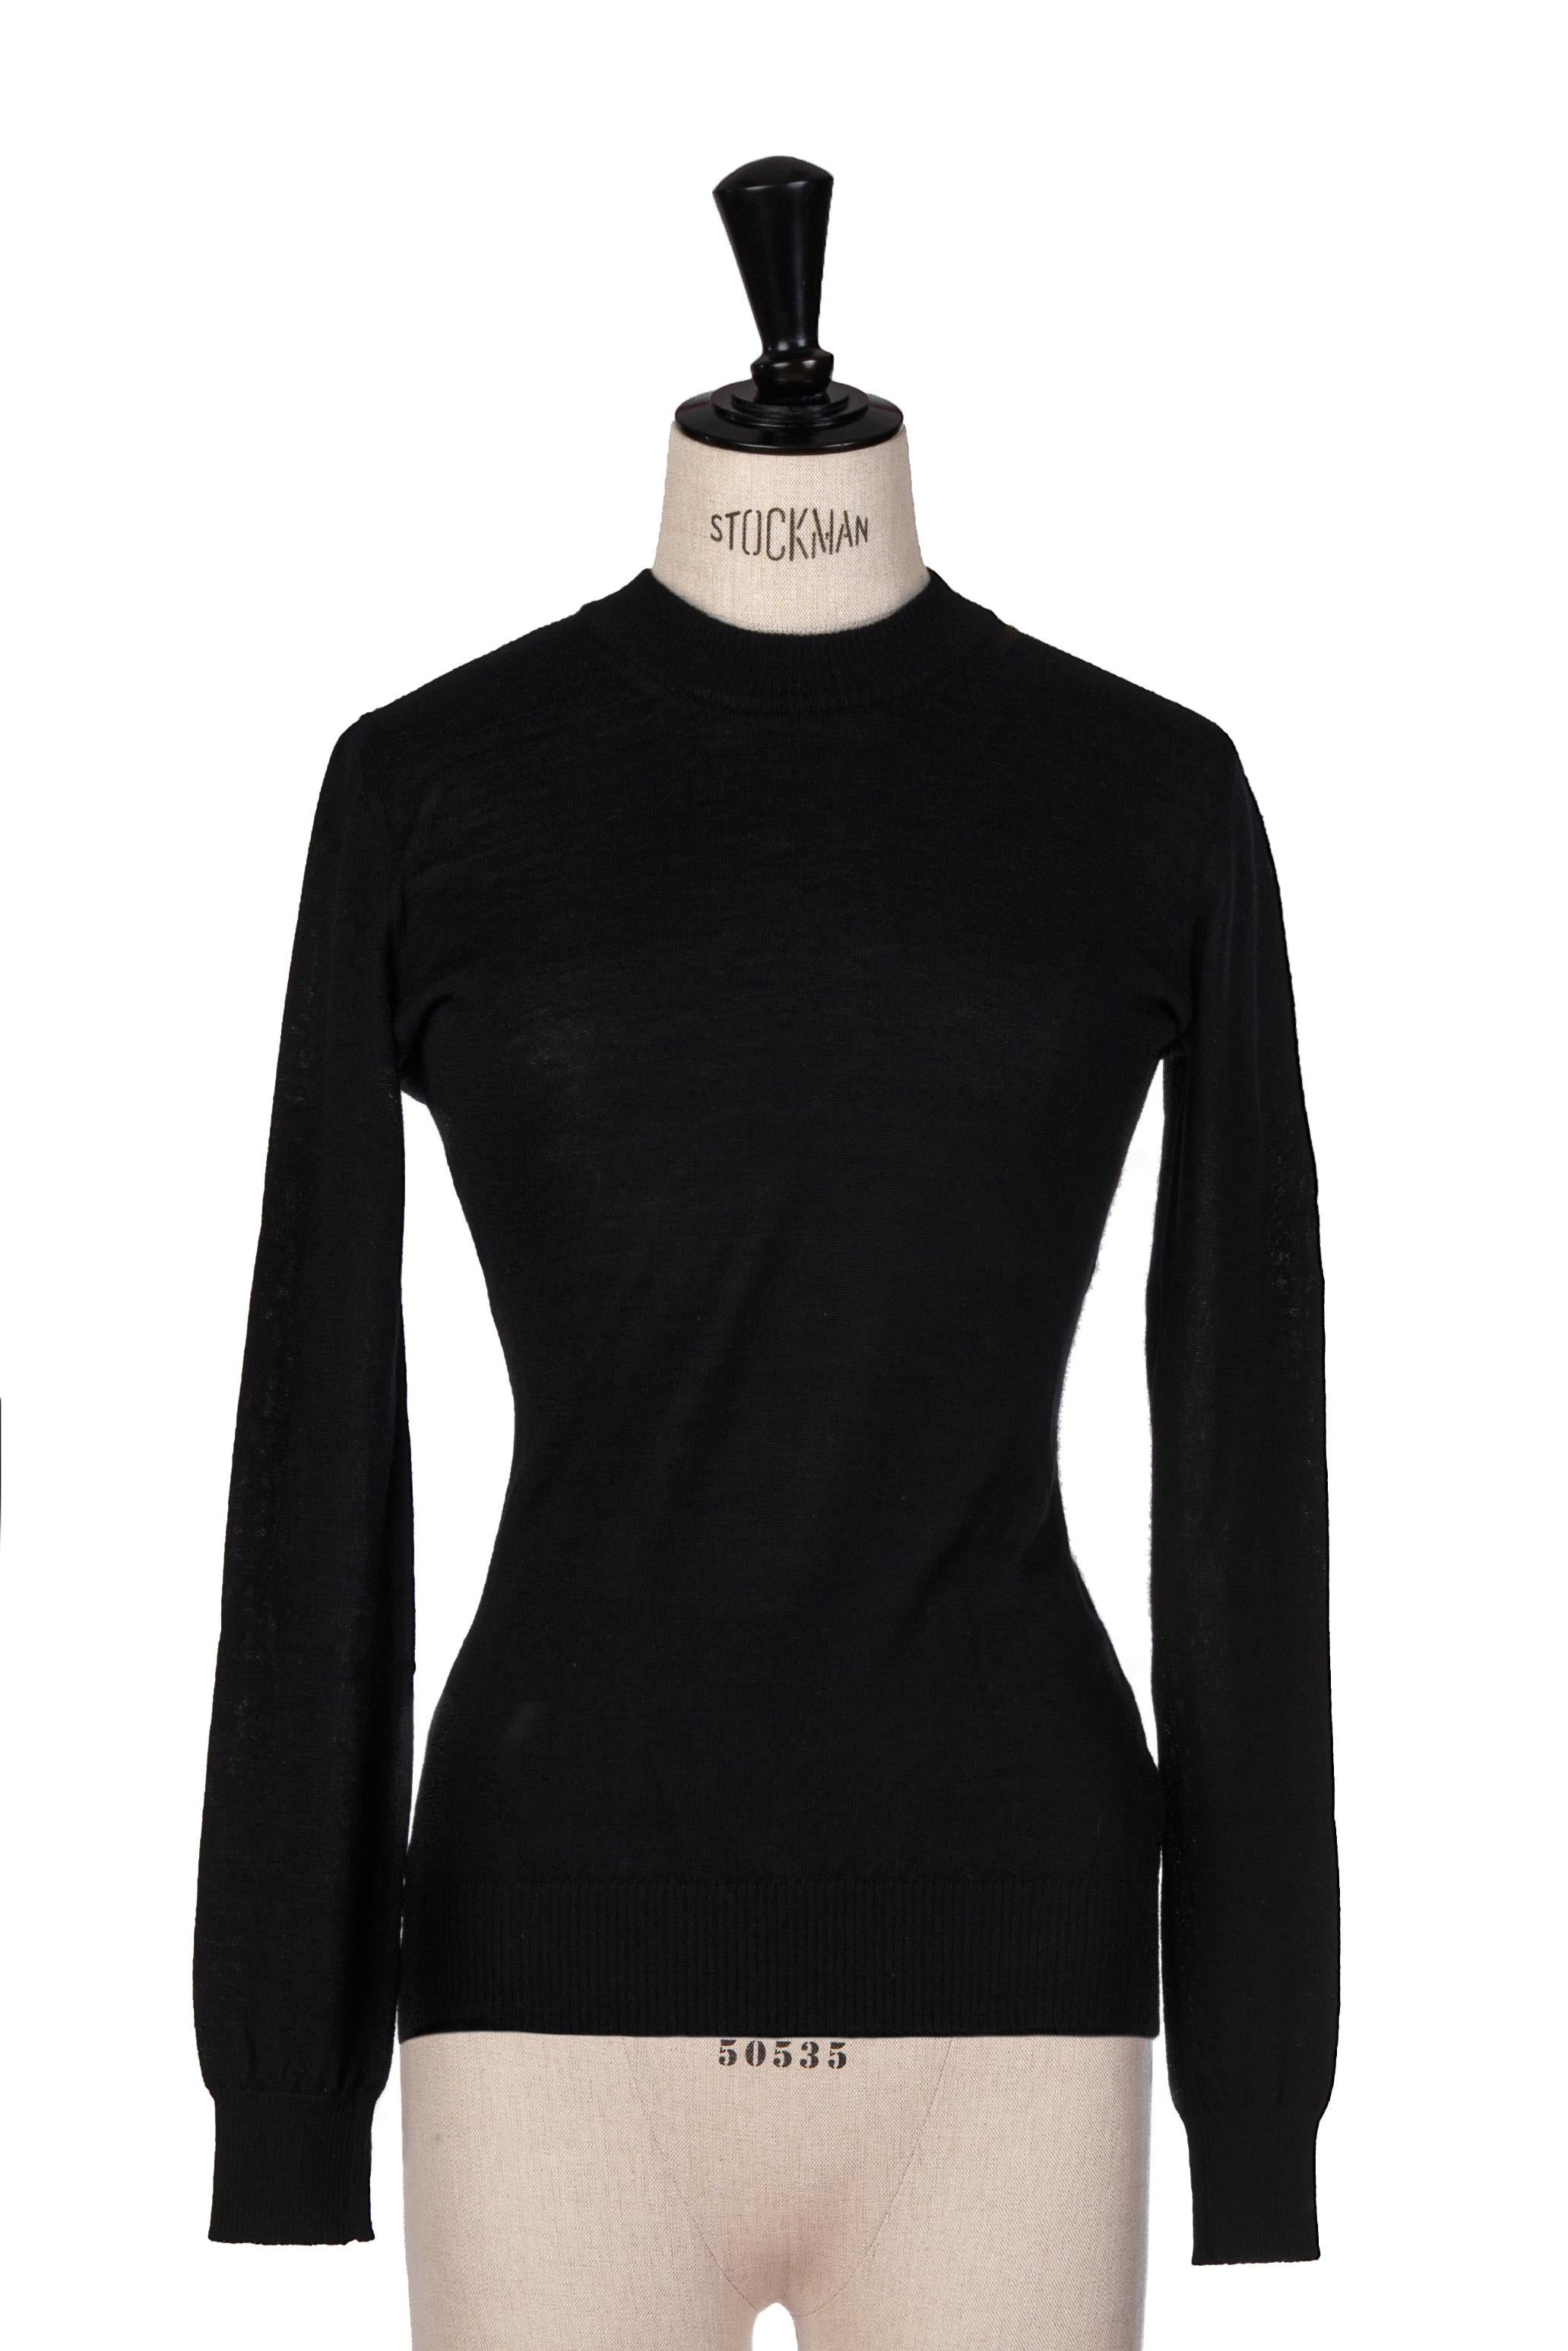 Azzedine Alaïa is one of the world's most respected fashion designers and known for his signature body-con silhouettes and his talent for producing discreet luxury.

This is a minimalist early 1990s Alaïa mock neck jumper or sweater with long